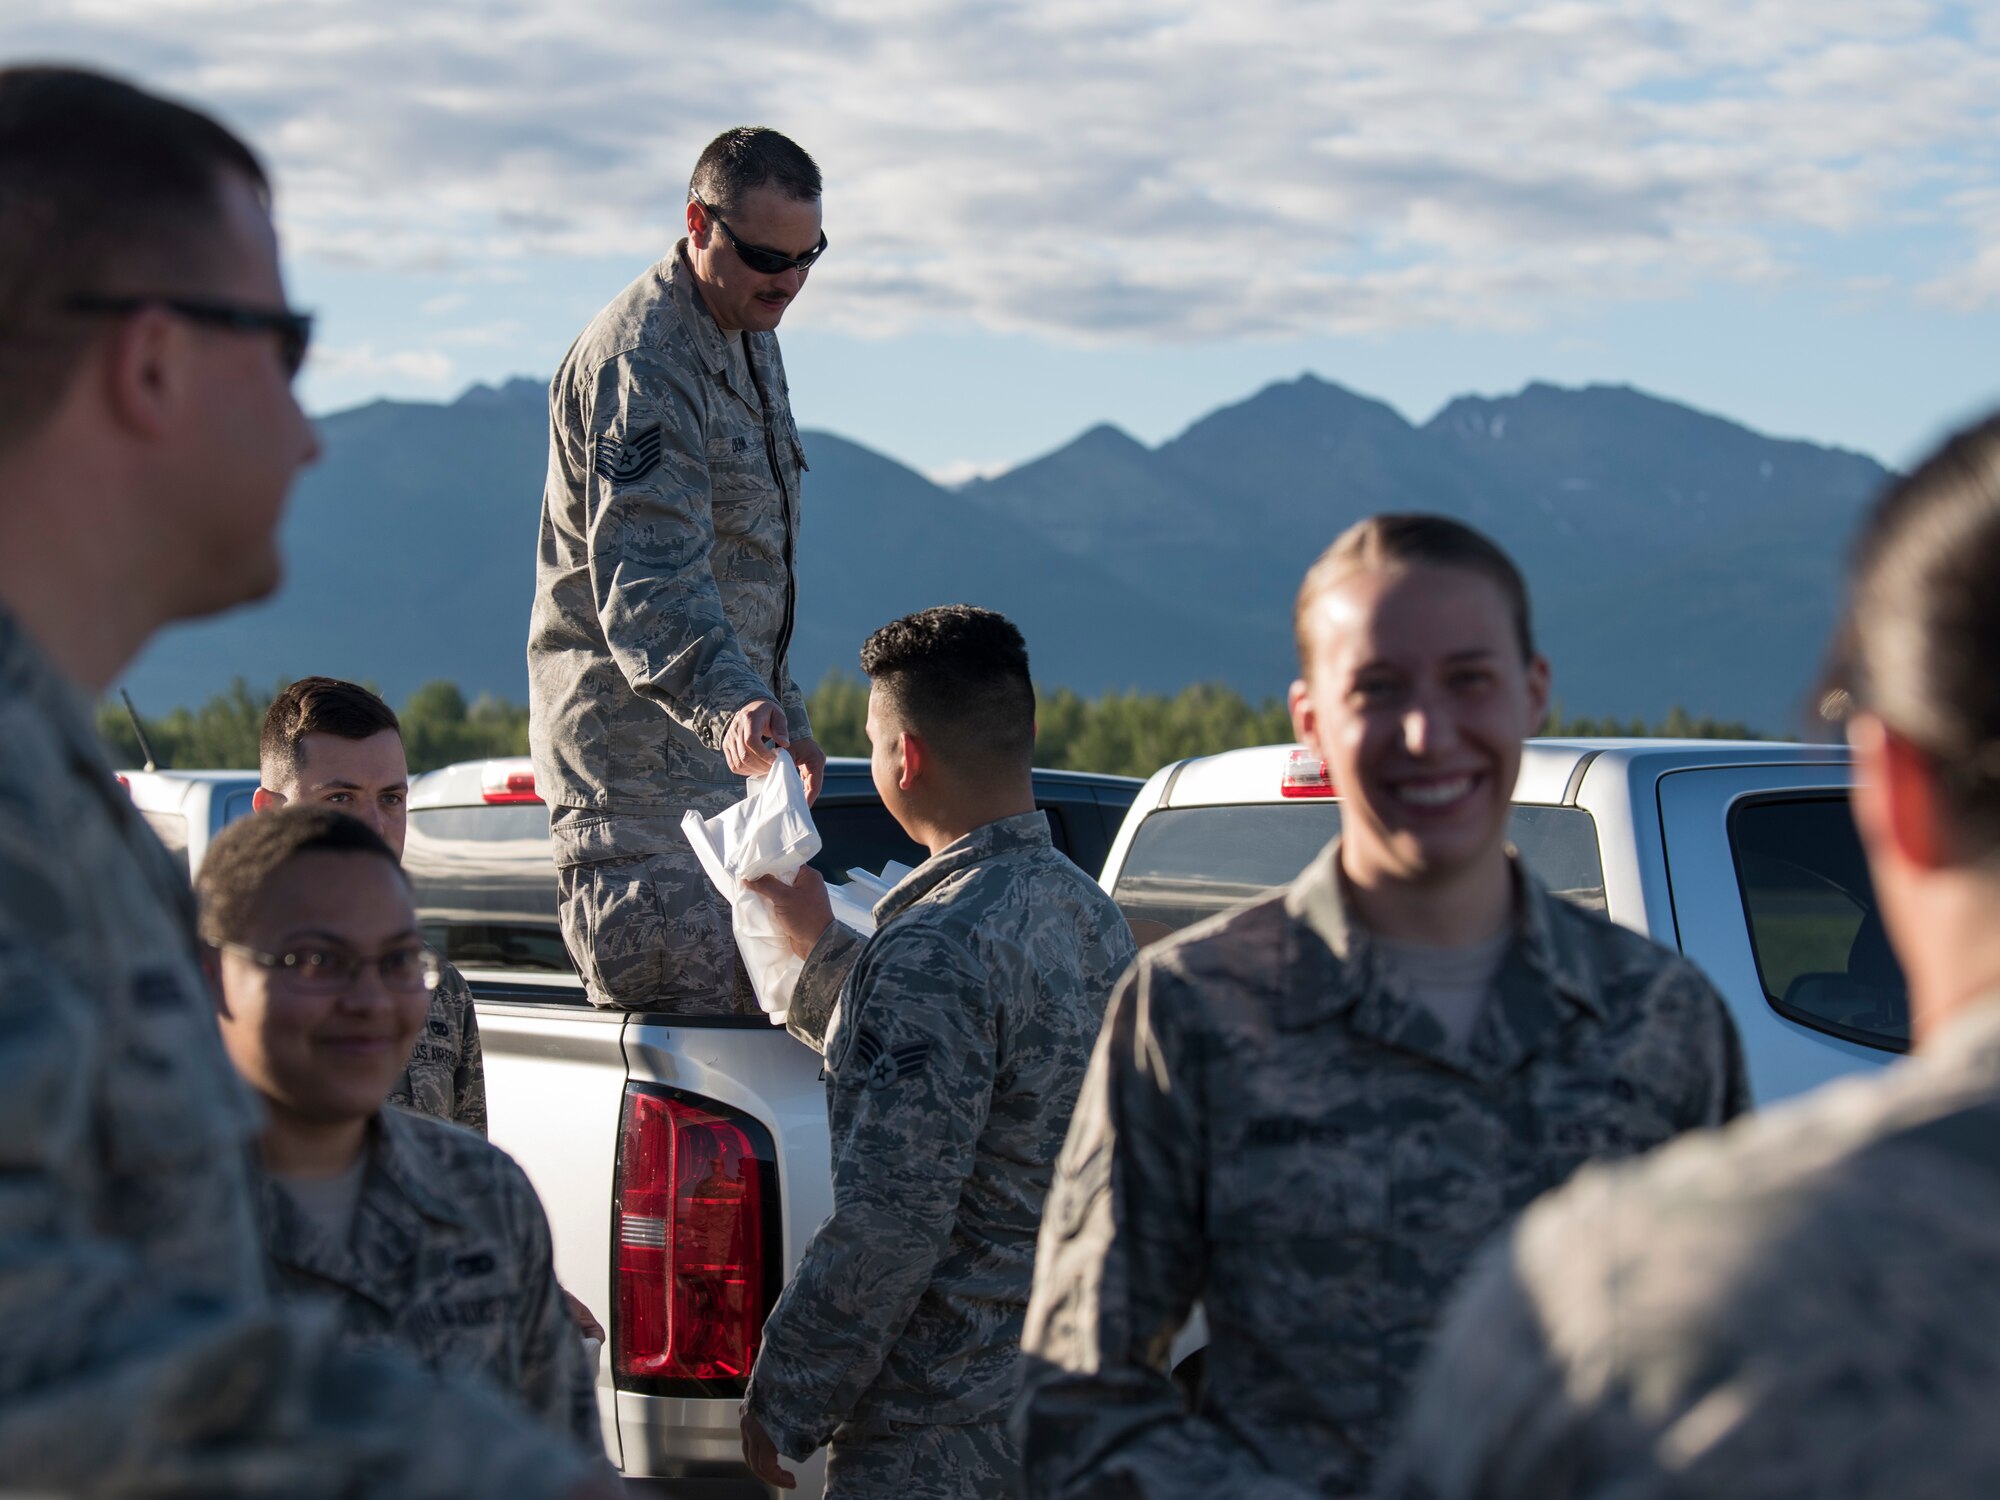 Tech. Sgt. Hayden Dunn, a 3rd Munitions Squadron production flight supervisor, hands active-duty Airmen trash bags as they prepare to conduct a foreign object and debris walk at Joint Base Elmendorf-Richardson, Alaska, July 2, 2018. The JBER Airmen conducted the FOD walk after the Arctic Thunder Open House to remove debris that could damage aircraft and hinder mission readiness.